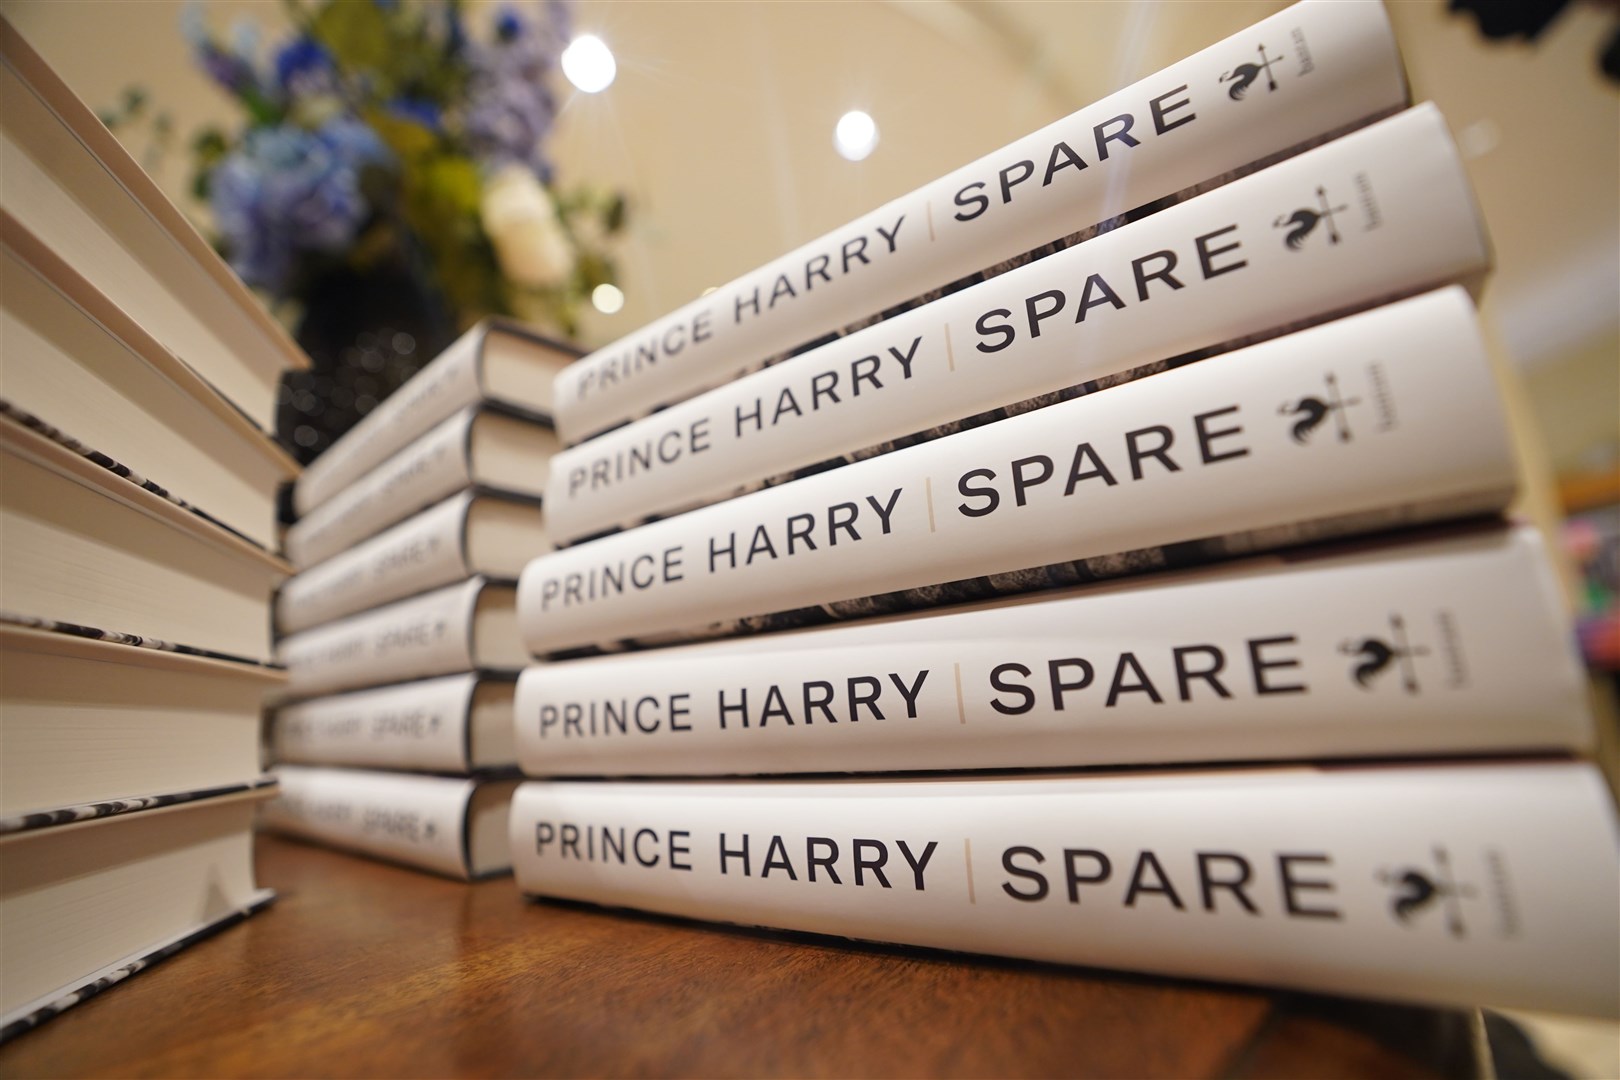 The Duke of Sussex’s book Spare went on sale on Tuesday (PA)